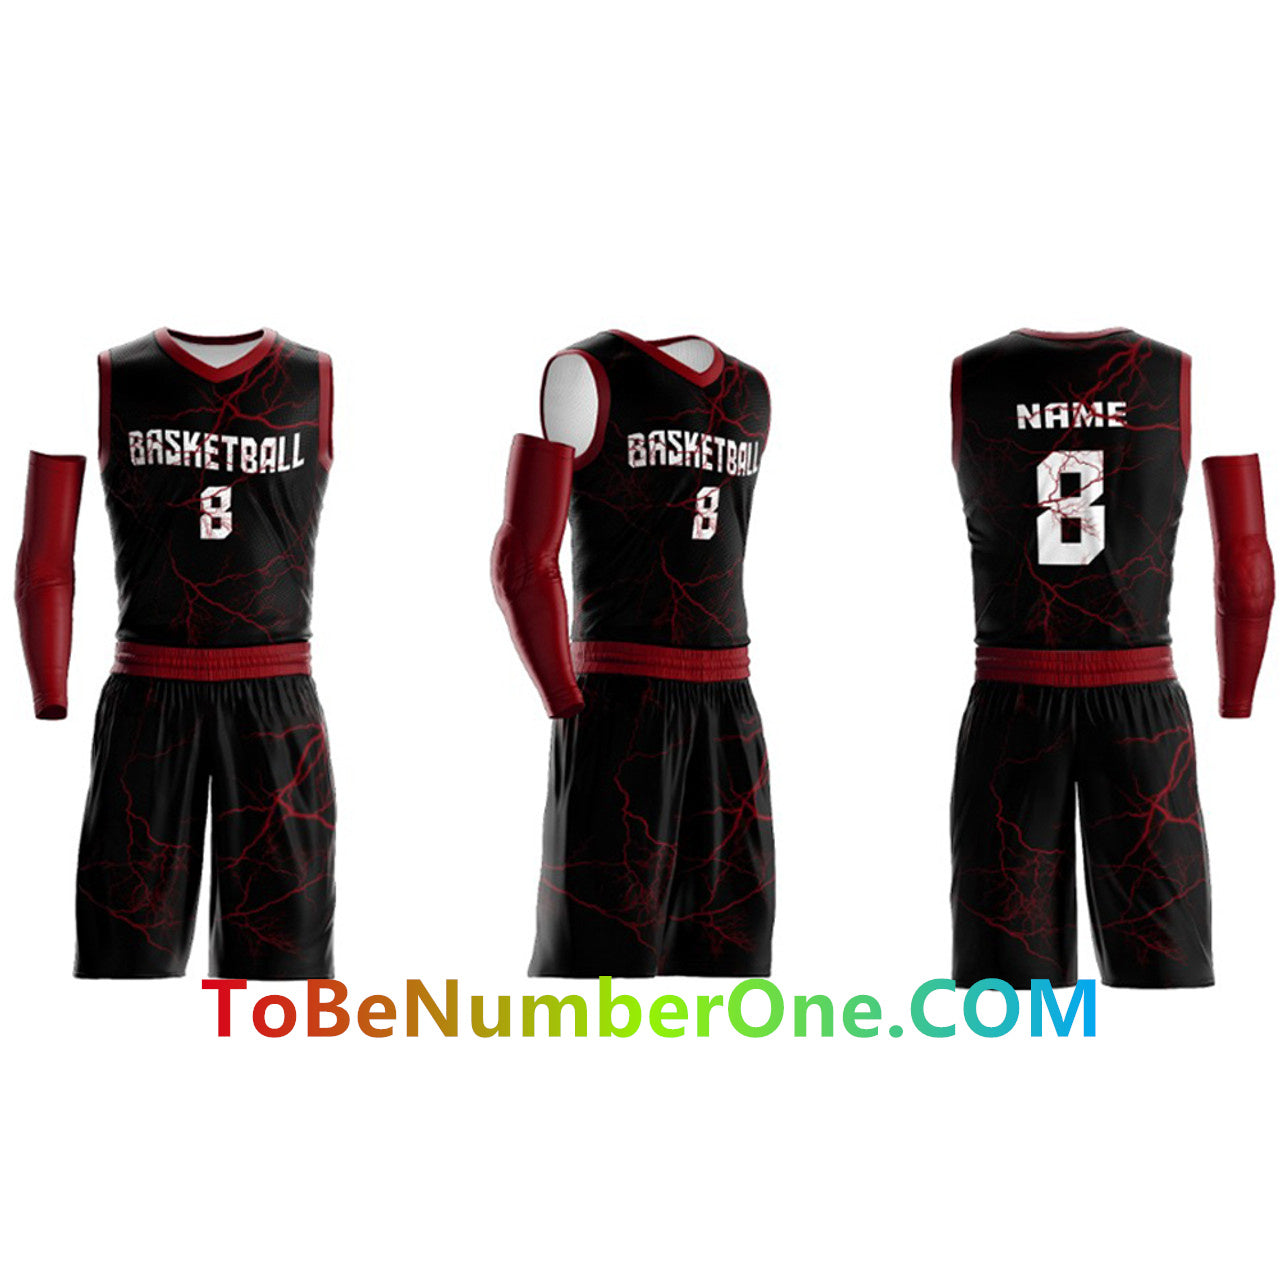 Custom Full Sublimated Basketball Set Tops and shorts - Make Your OWN Jersey - Personalized Team Uniforms B032